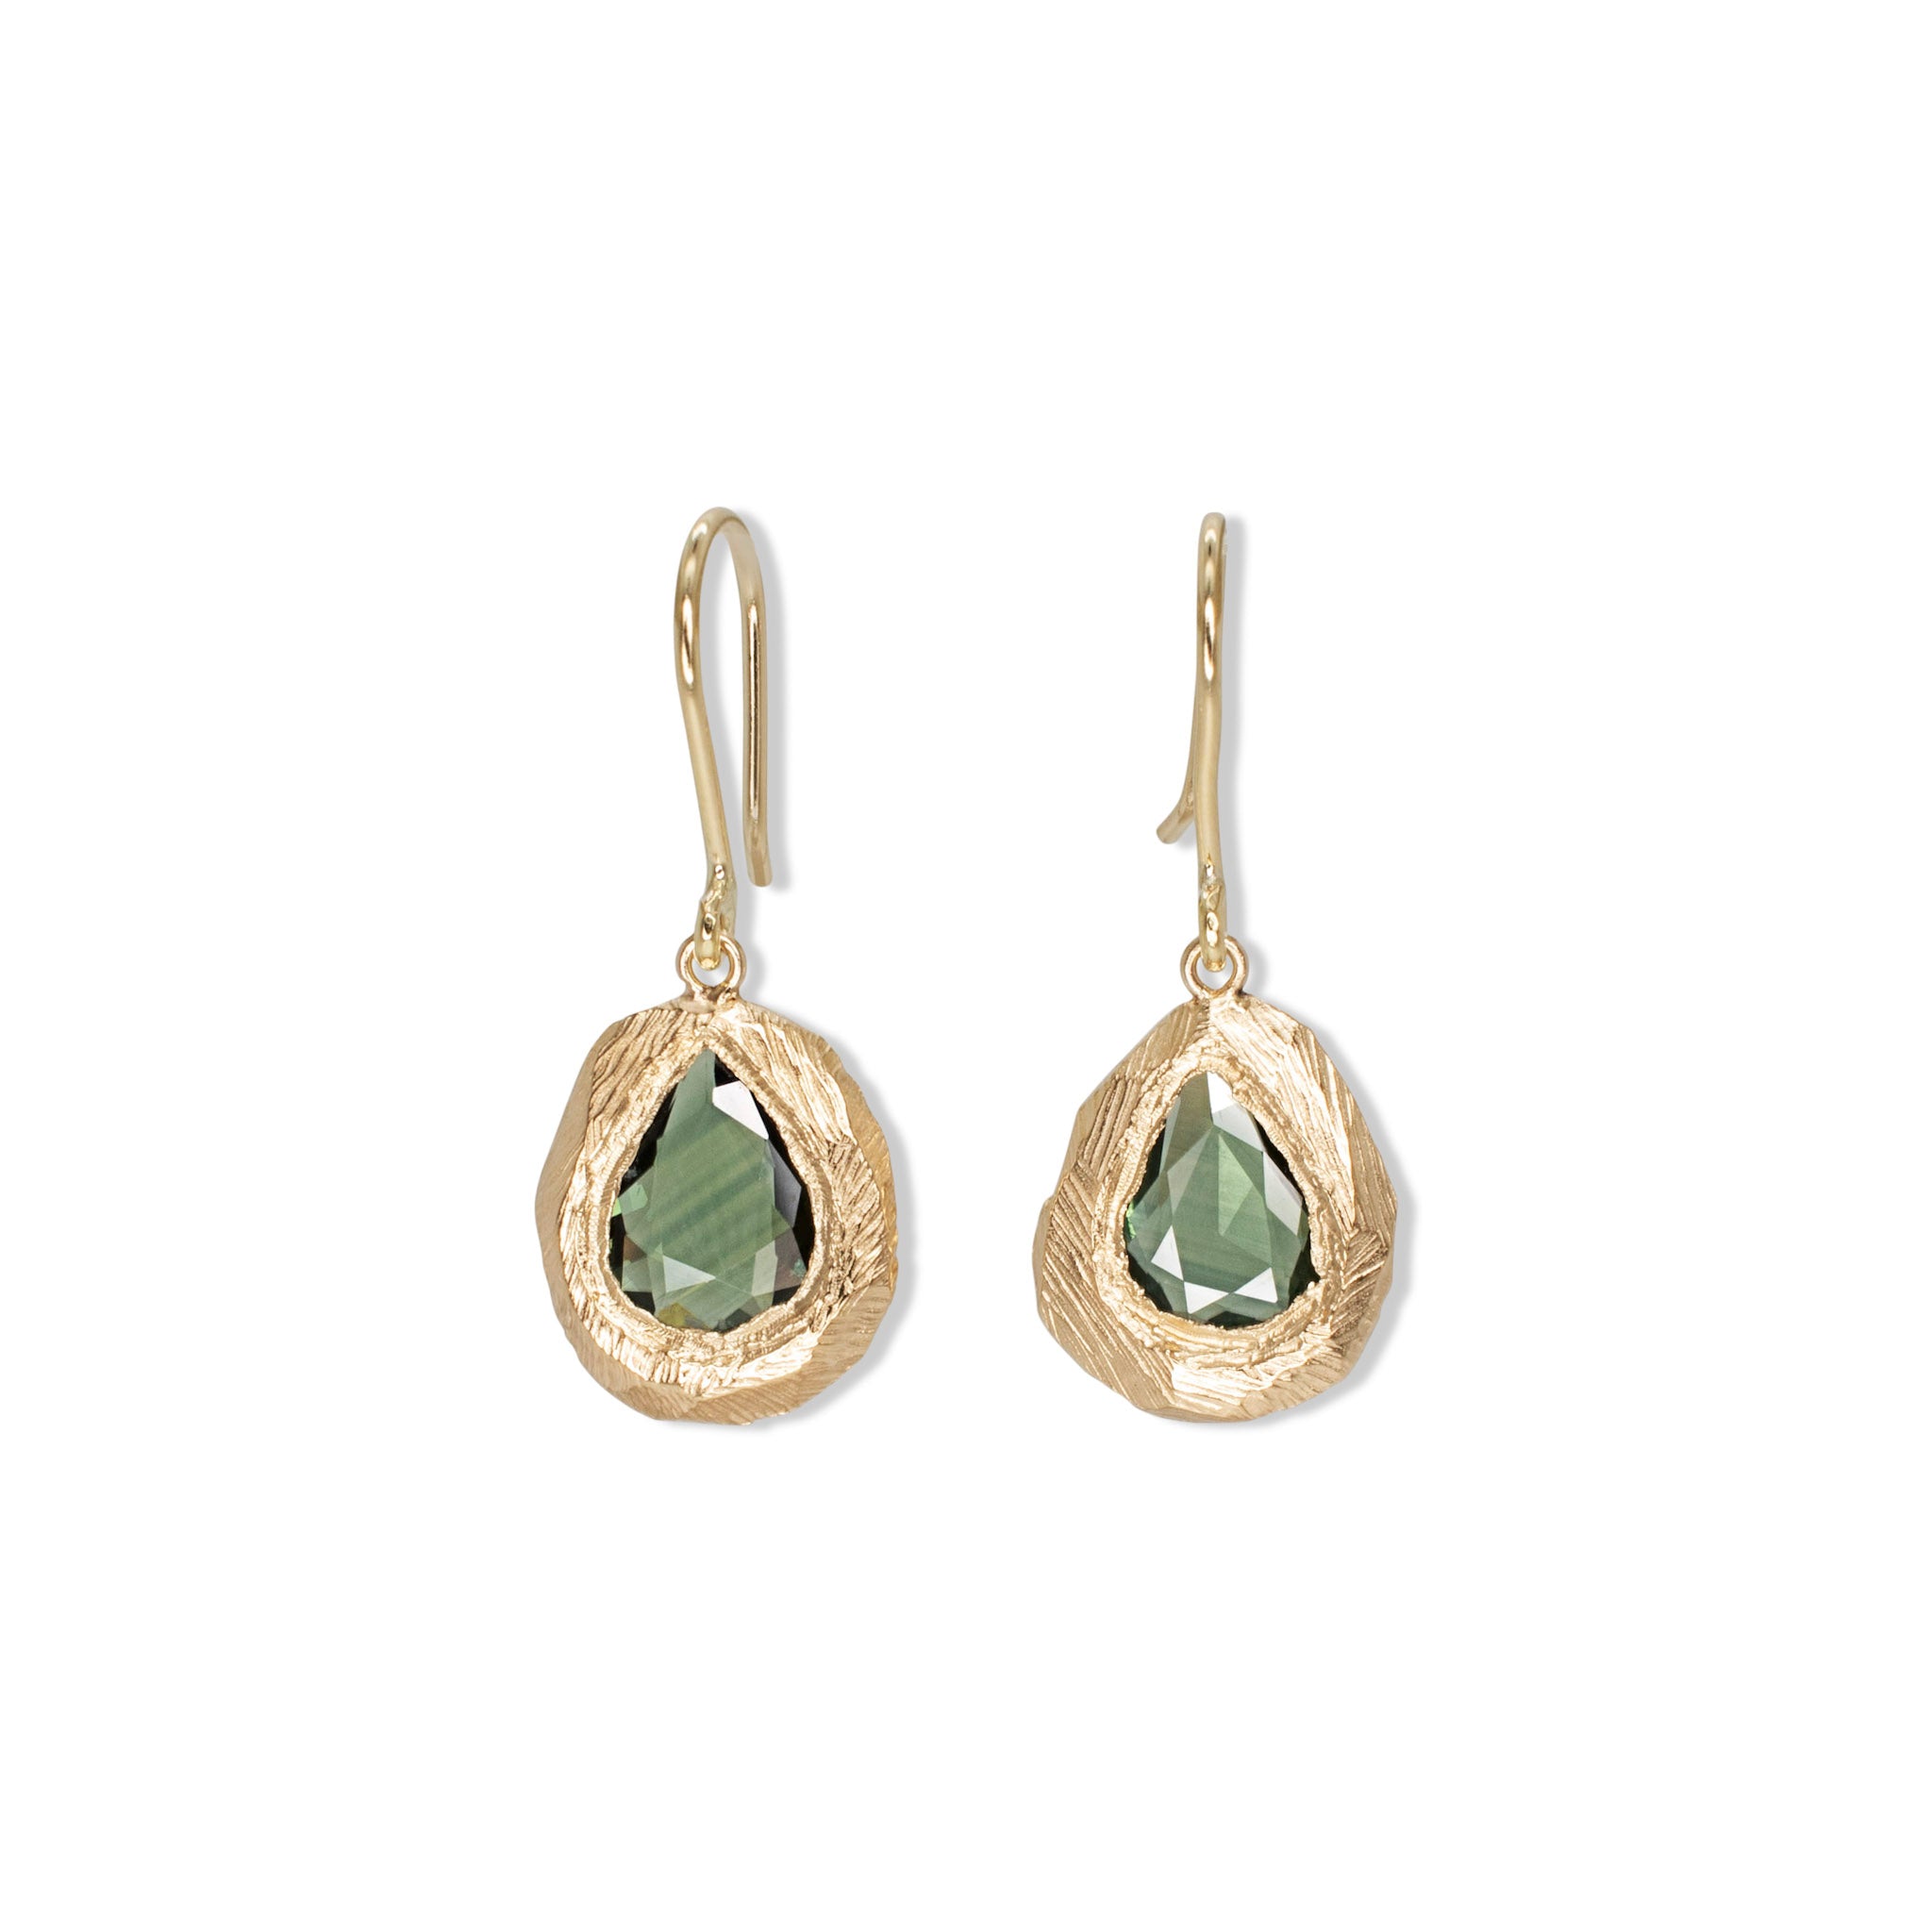 Buy Leaf Pattern Silver Drop Earring with Dark Green Pearls for Women for  Best Price, Reviews, Free Shipping